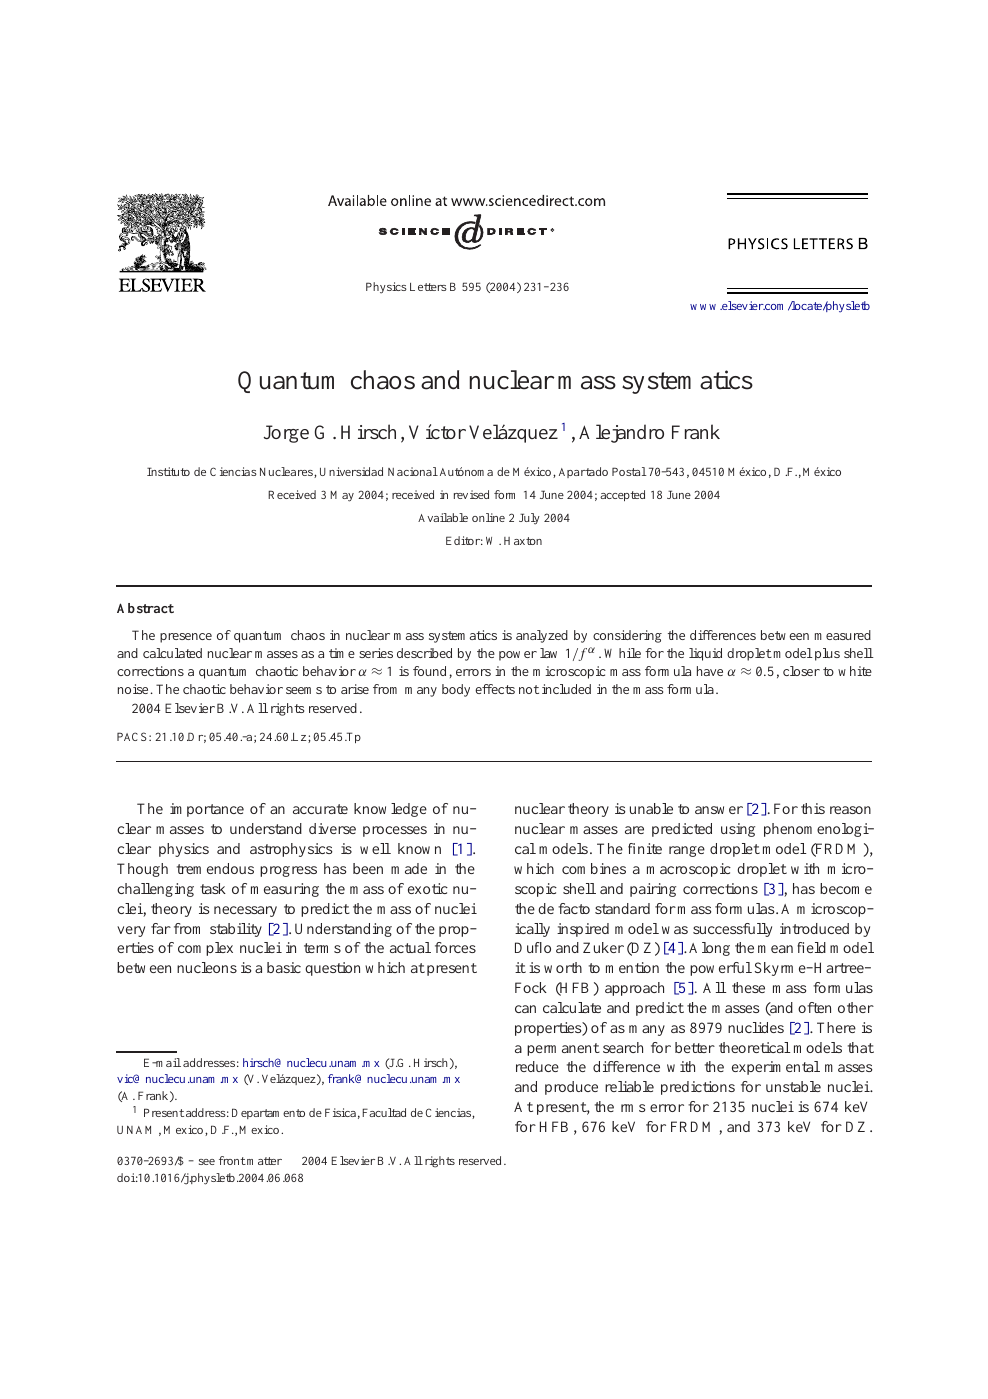 Quantum Chaos And Nuclear Mass Systematics Topic Of Research Paper In Physical Sciences Download Scholarly Article Pdf And Read For Free On Cyberleninka Open Science Hub